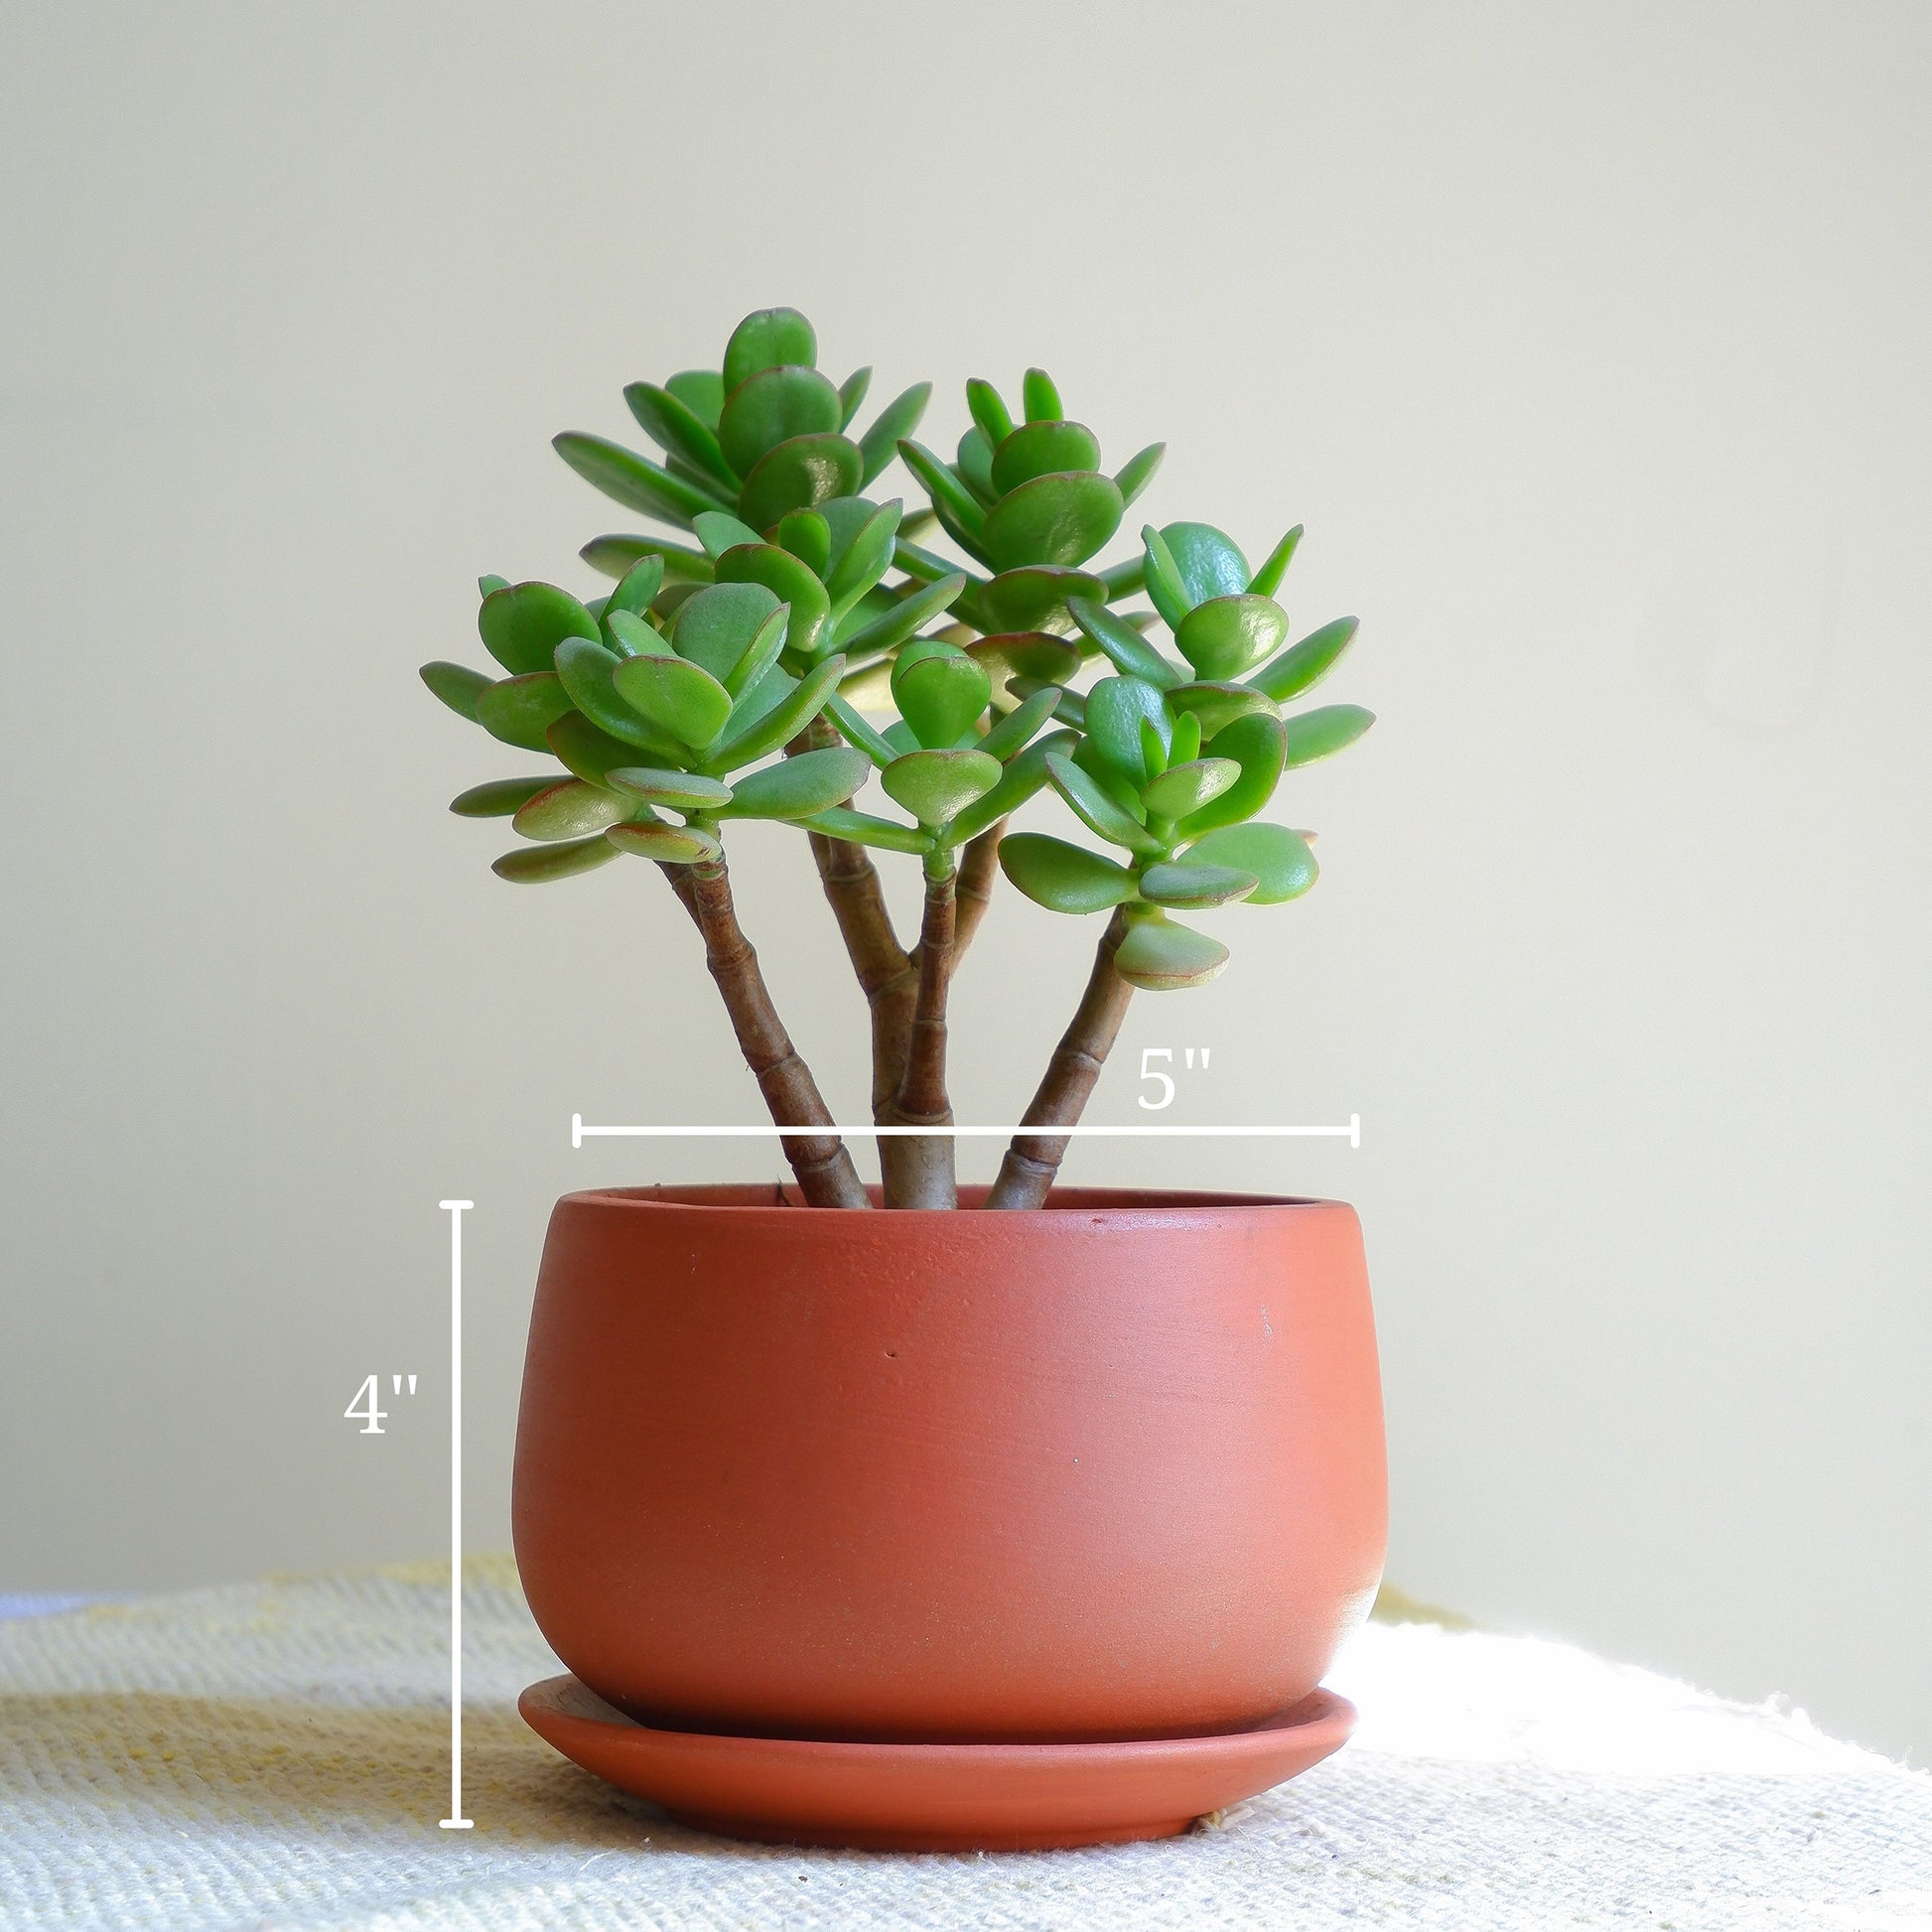 Tabletop Terracotta Clay Pots planters for small indoor plants, delivered All India